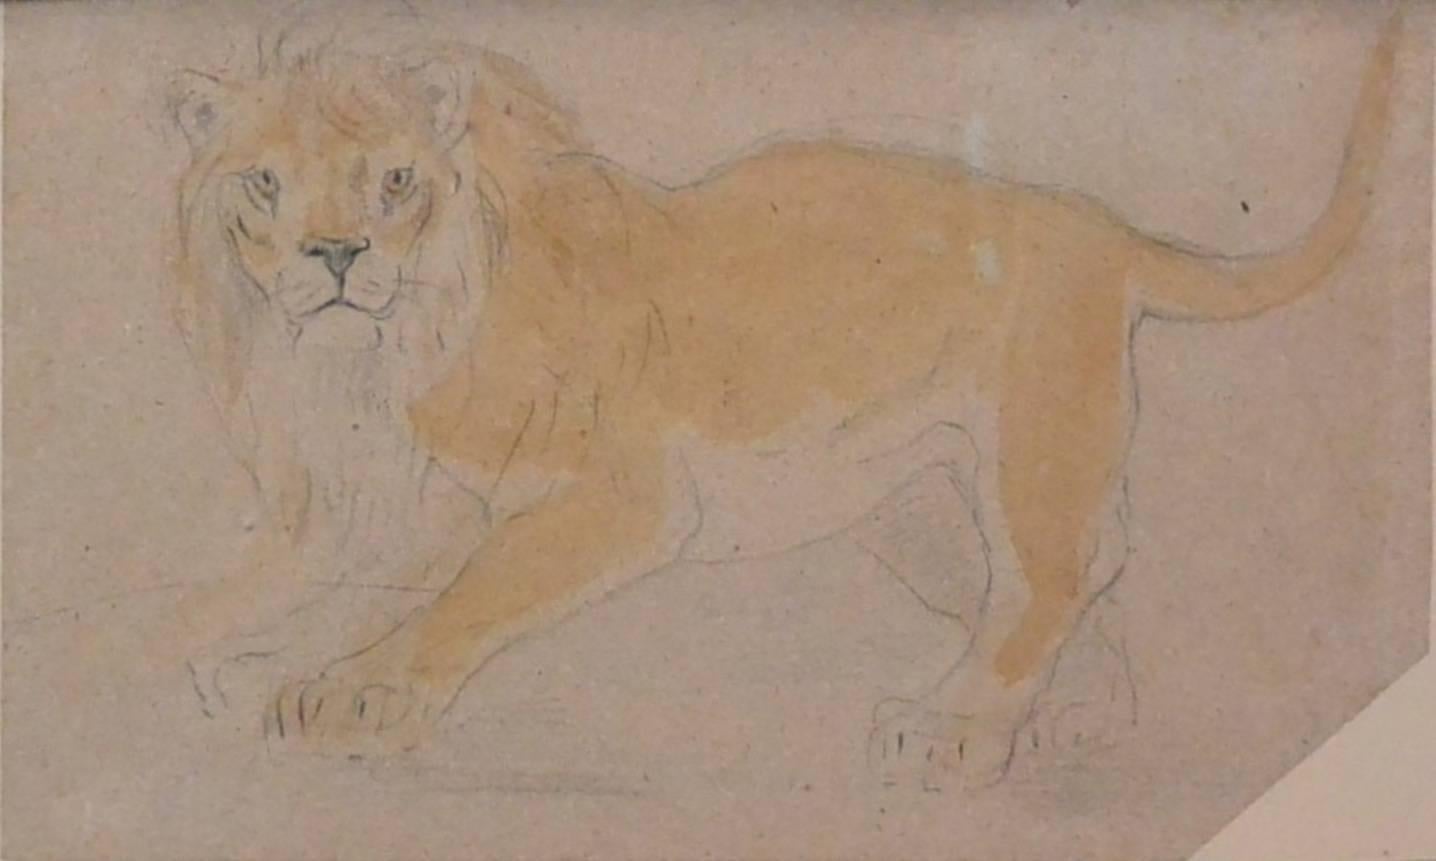 Edme Saint-Marcel (1819-1890) pencil, black crayon and watercolor drawing of a lion attributed to Edme Saint-Marcel-Cabin, France, 19th century. 
Dimensions: 12